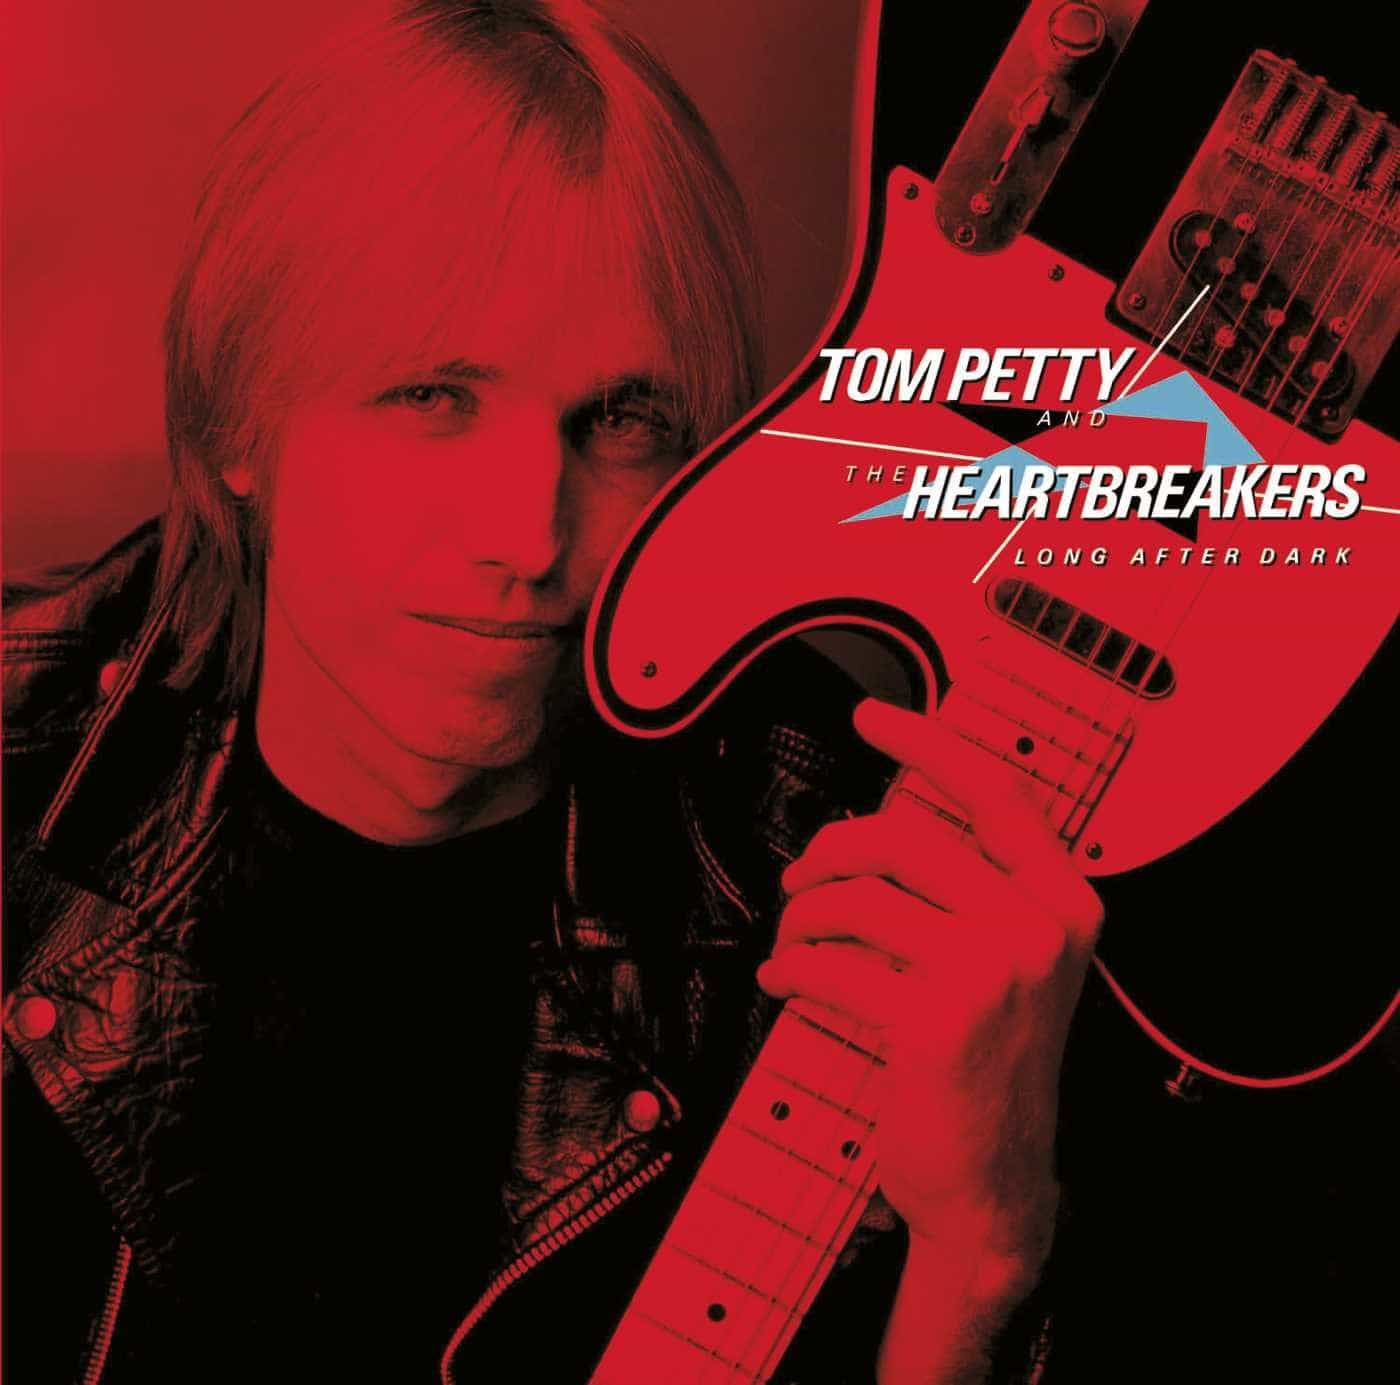 Tom-Petty-And-the-Heartbreakers-Long-After-Dark-vinyl-record-album1